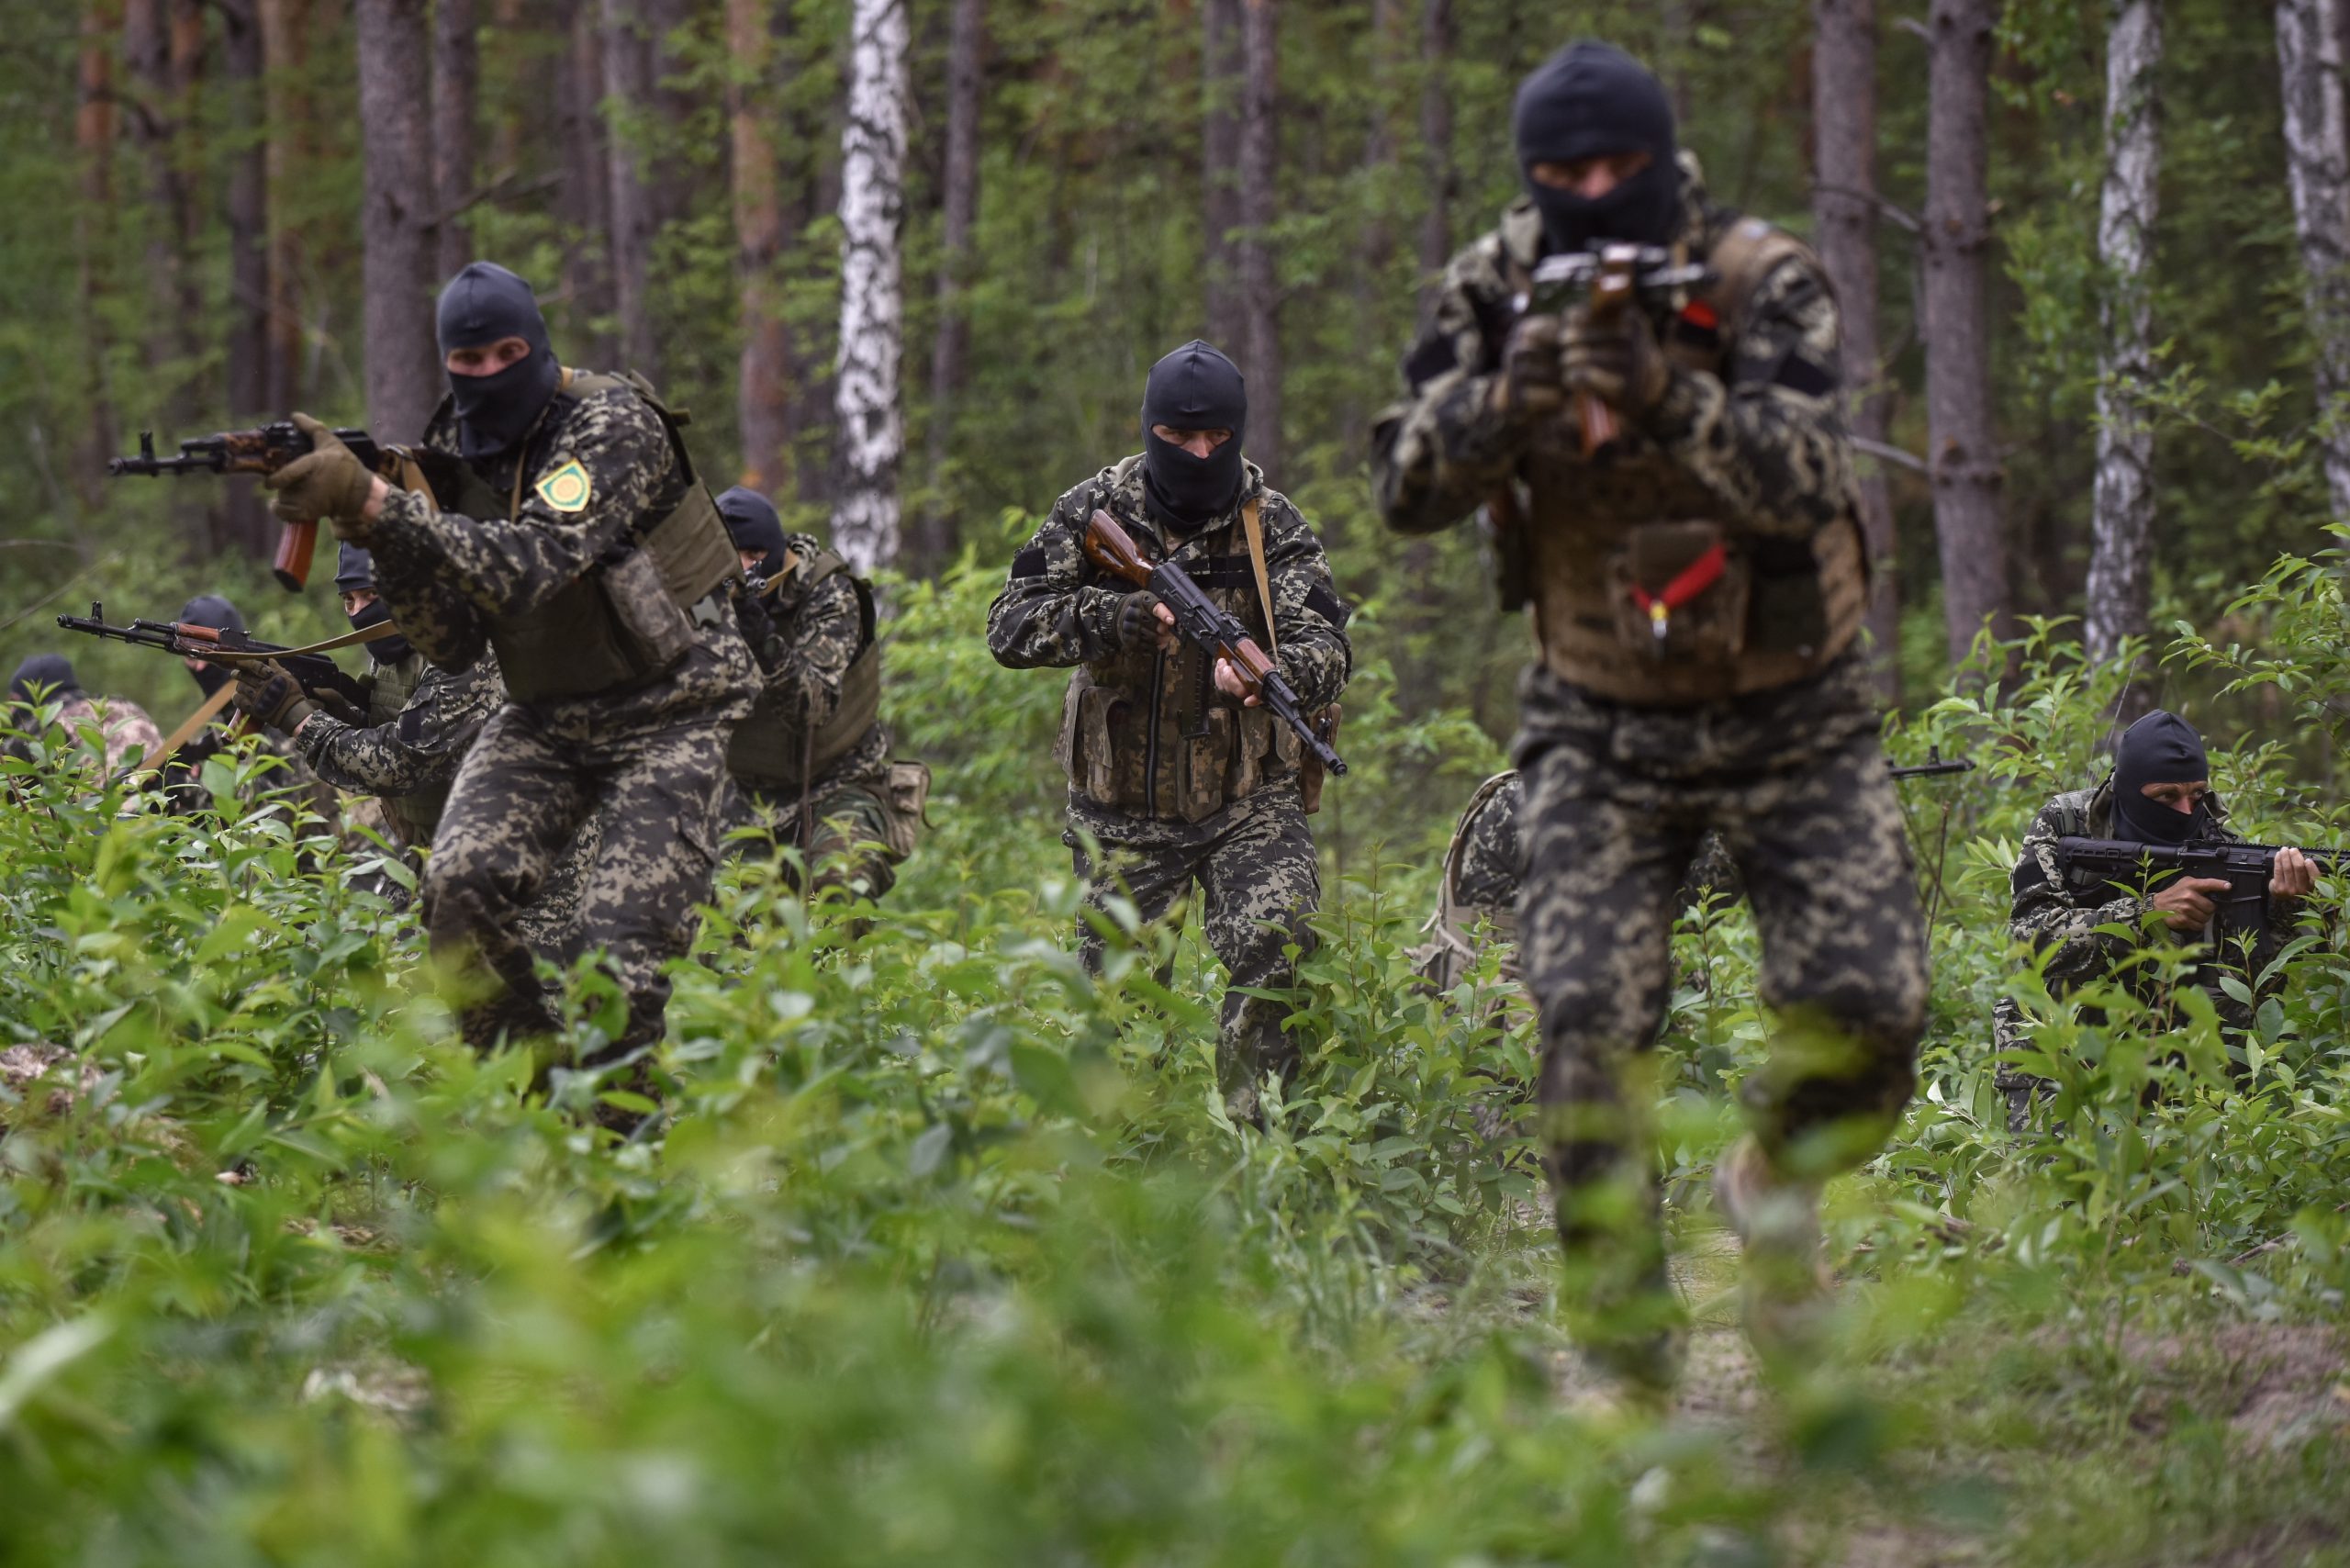 epa10018115 Members of the Bucha territorial defense forces hold their positions as they take part in combat training near Kyiv (Kiev), Ukraine, 17 June 2022. Russian troops on 24 February entered Ukrainian territory, starting a conflict that has provoked destruction and a humanitarian crisis.  EPA/OLEG PETRASYUK